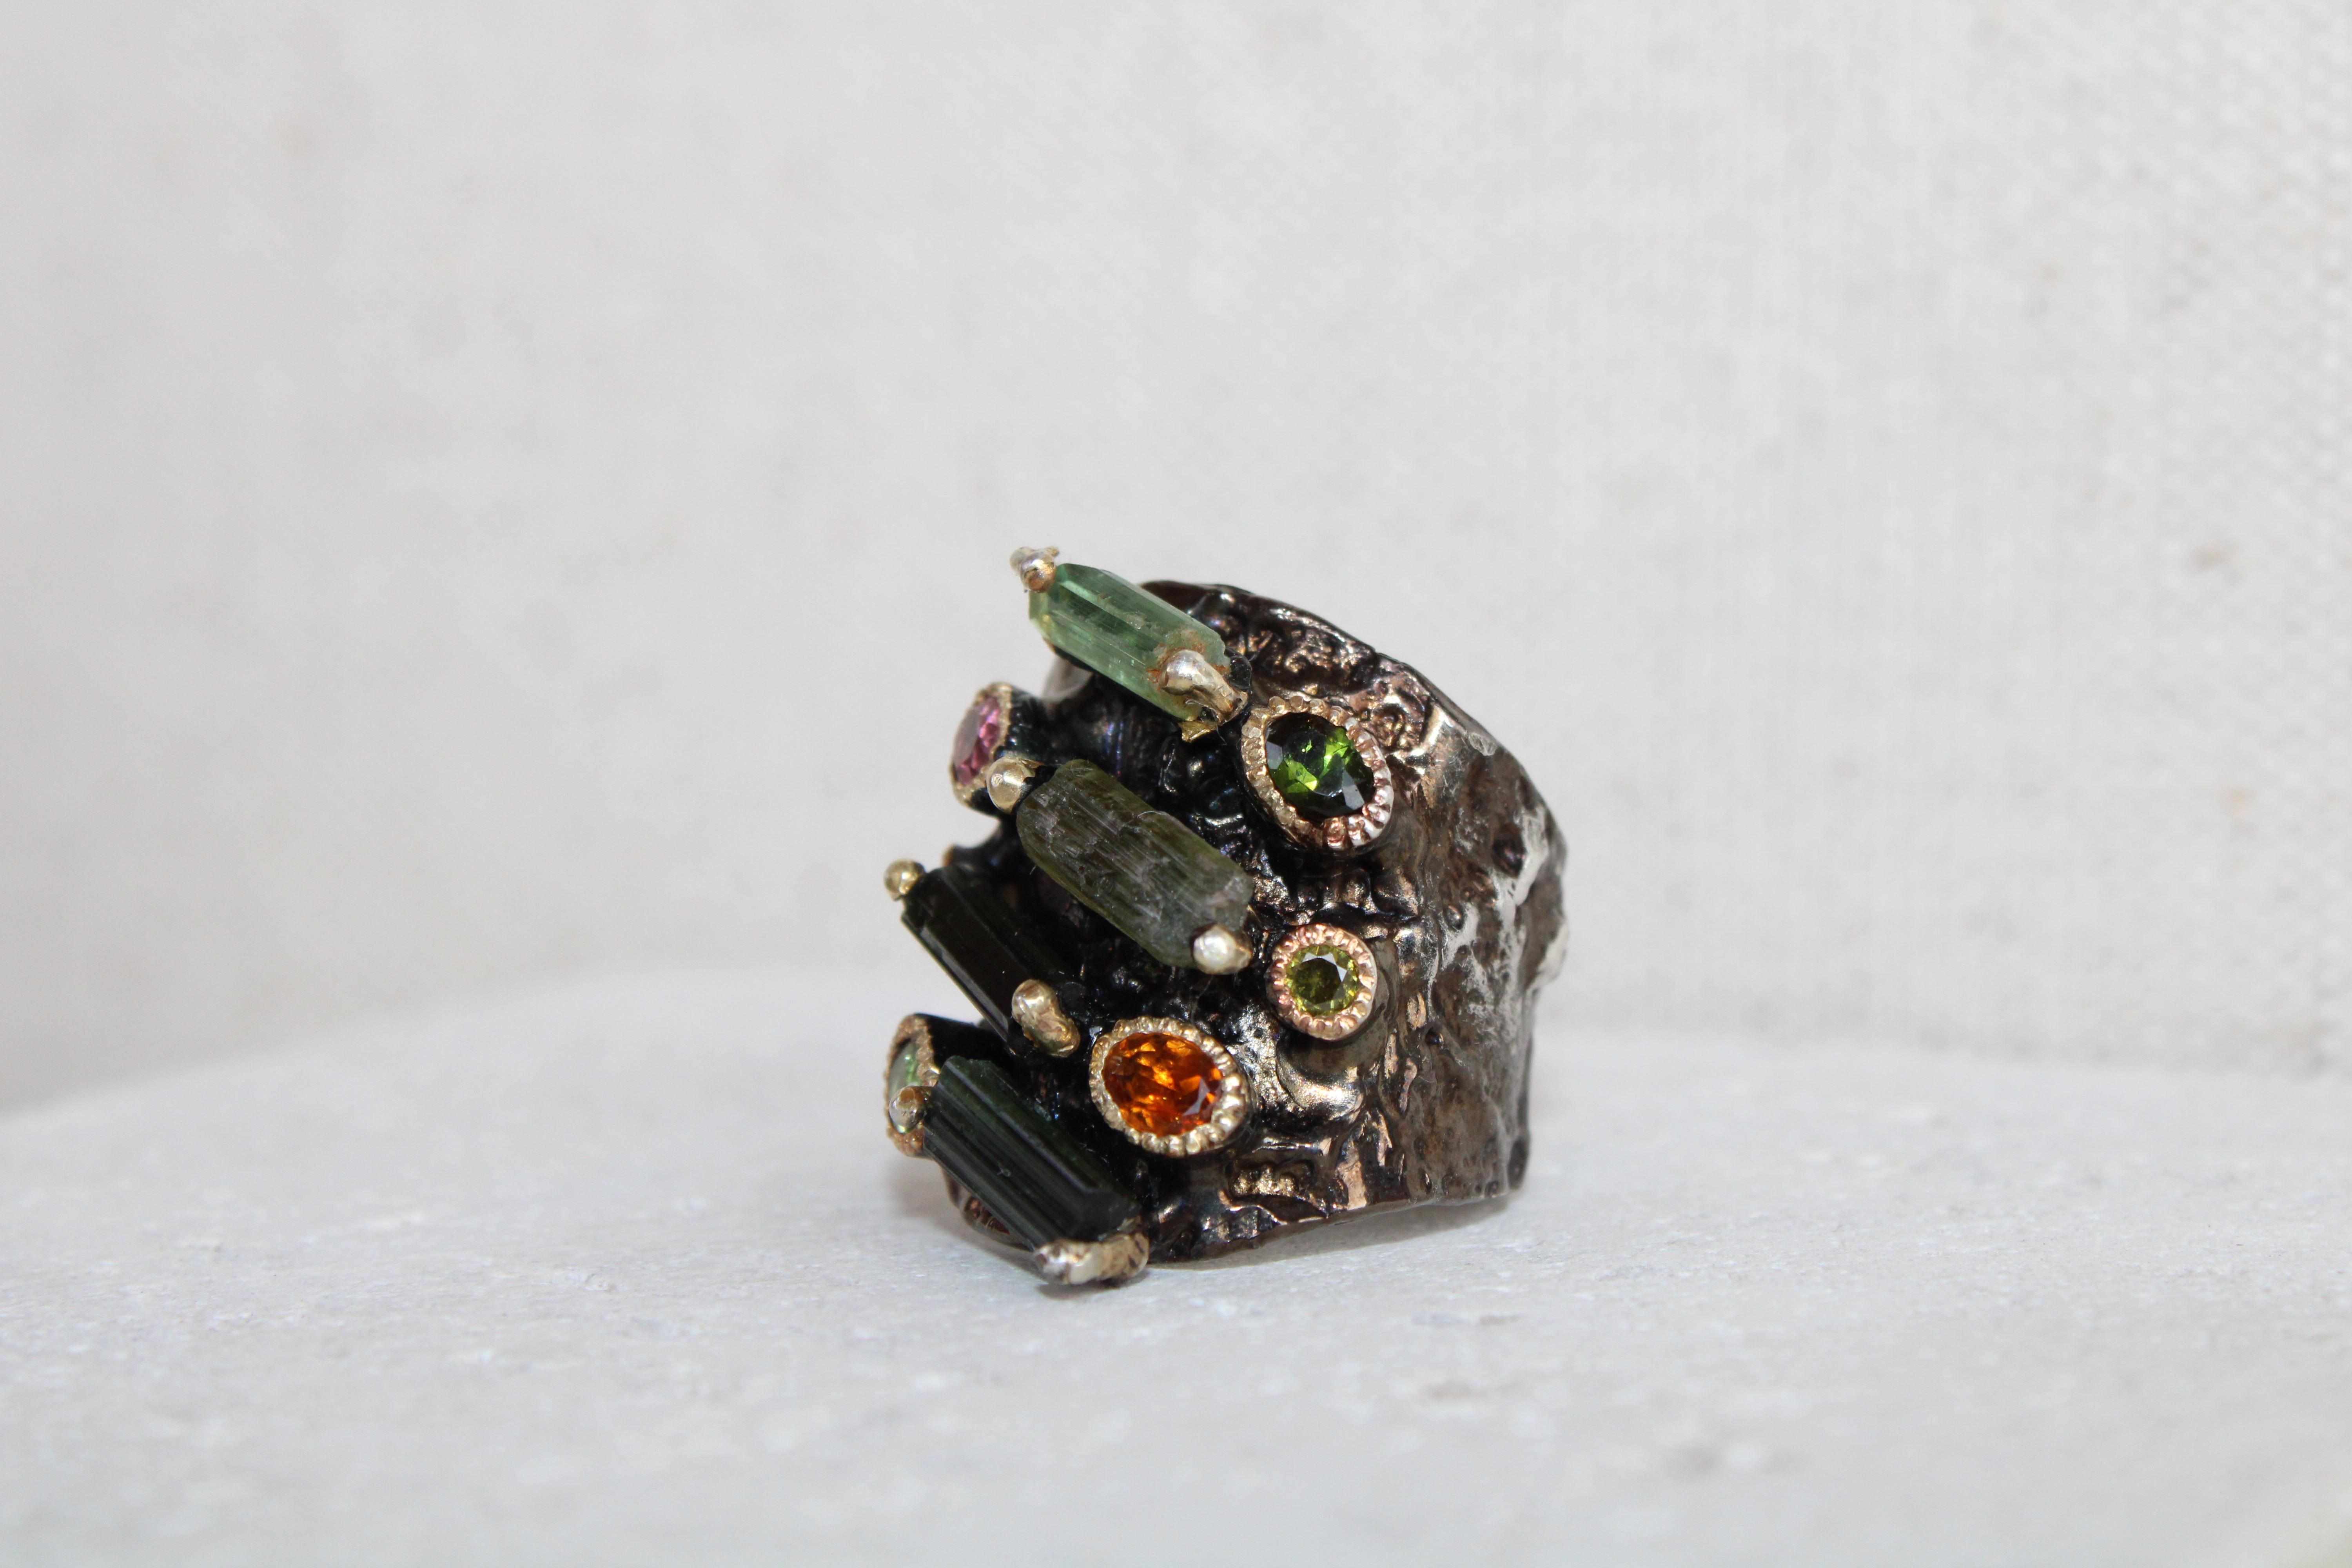 Unique and one-of-a-kind rough cut tourmaline cocktail ring. The ring is sterling silver with rhodium and gold plated. The ring also has oval cut tourmaline stones in orange, dark green, light green and pink in addition to the 4 rough cut